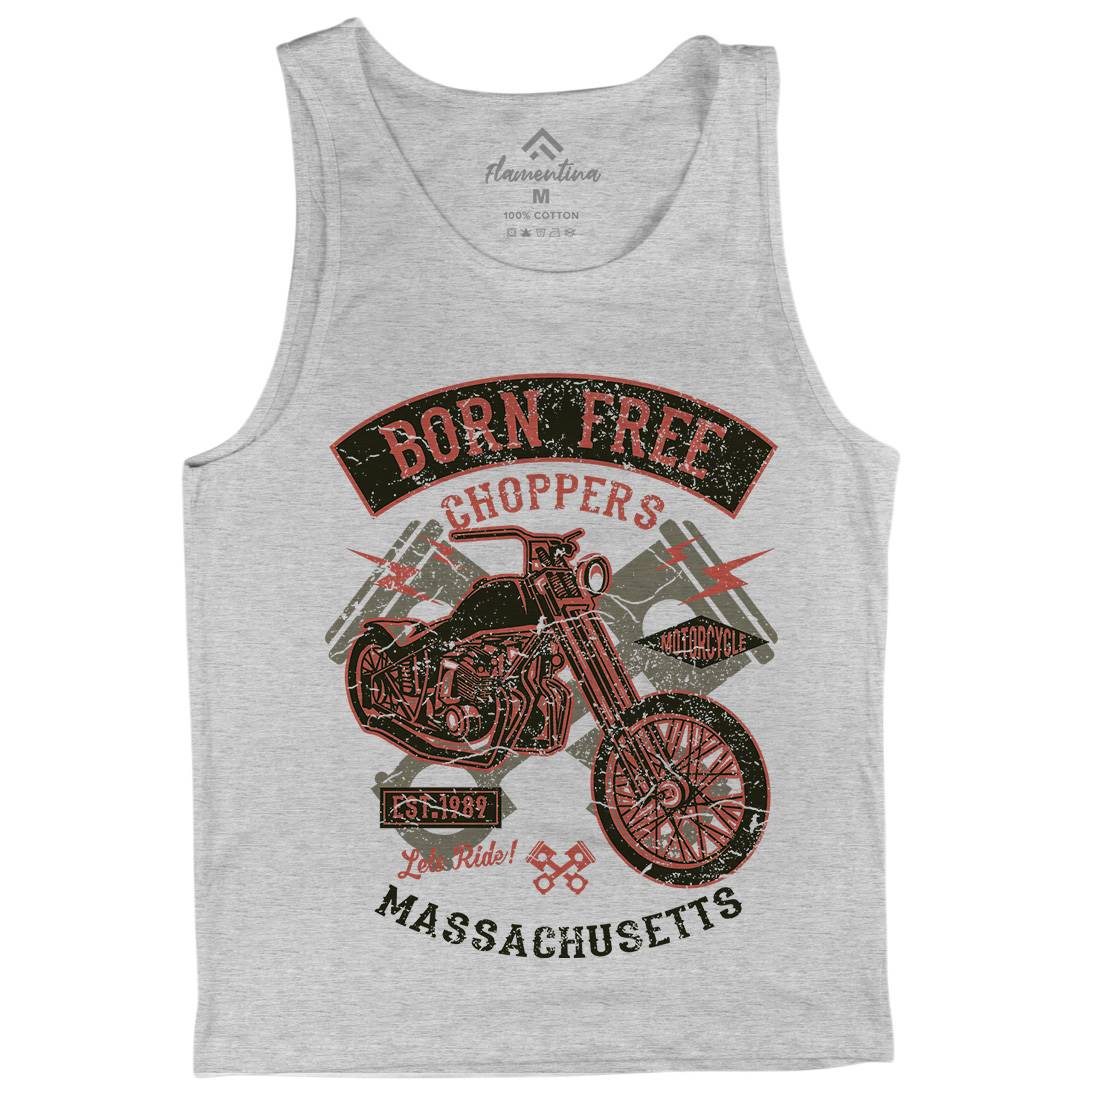 Born Free Choppers Mens Tank Top Vest Motorcycles A018